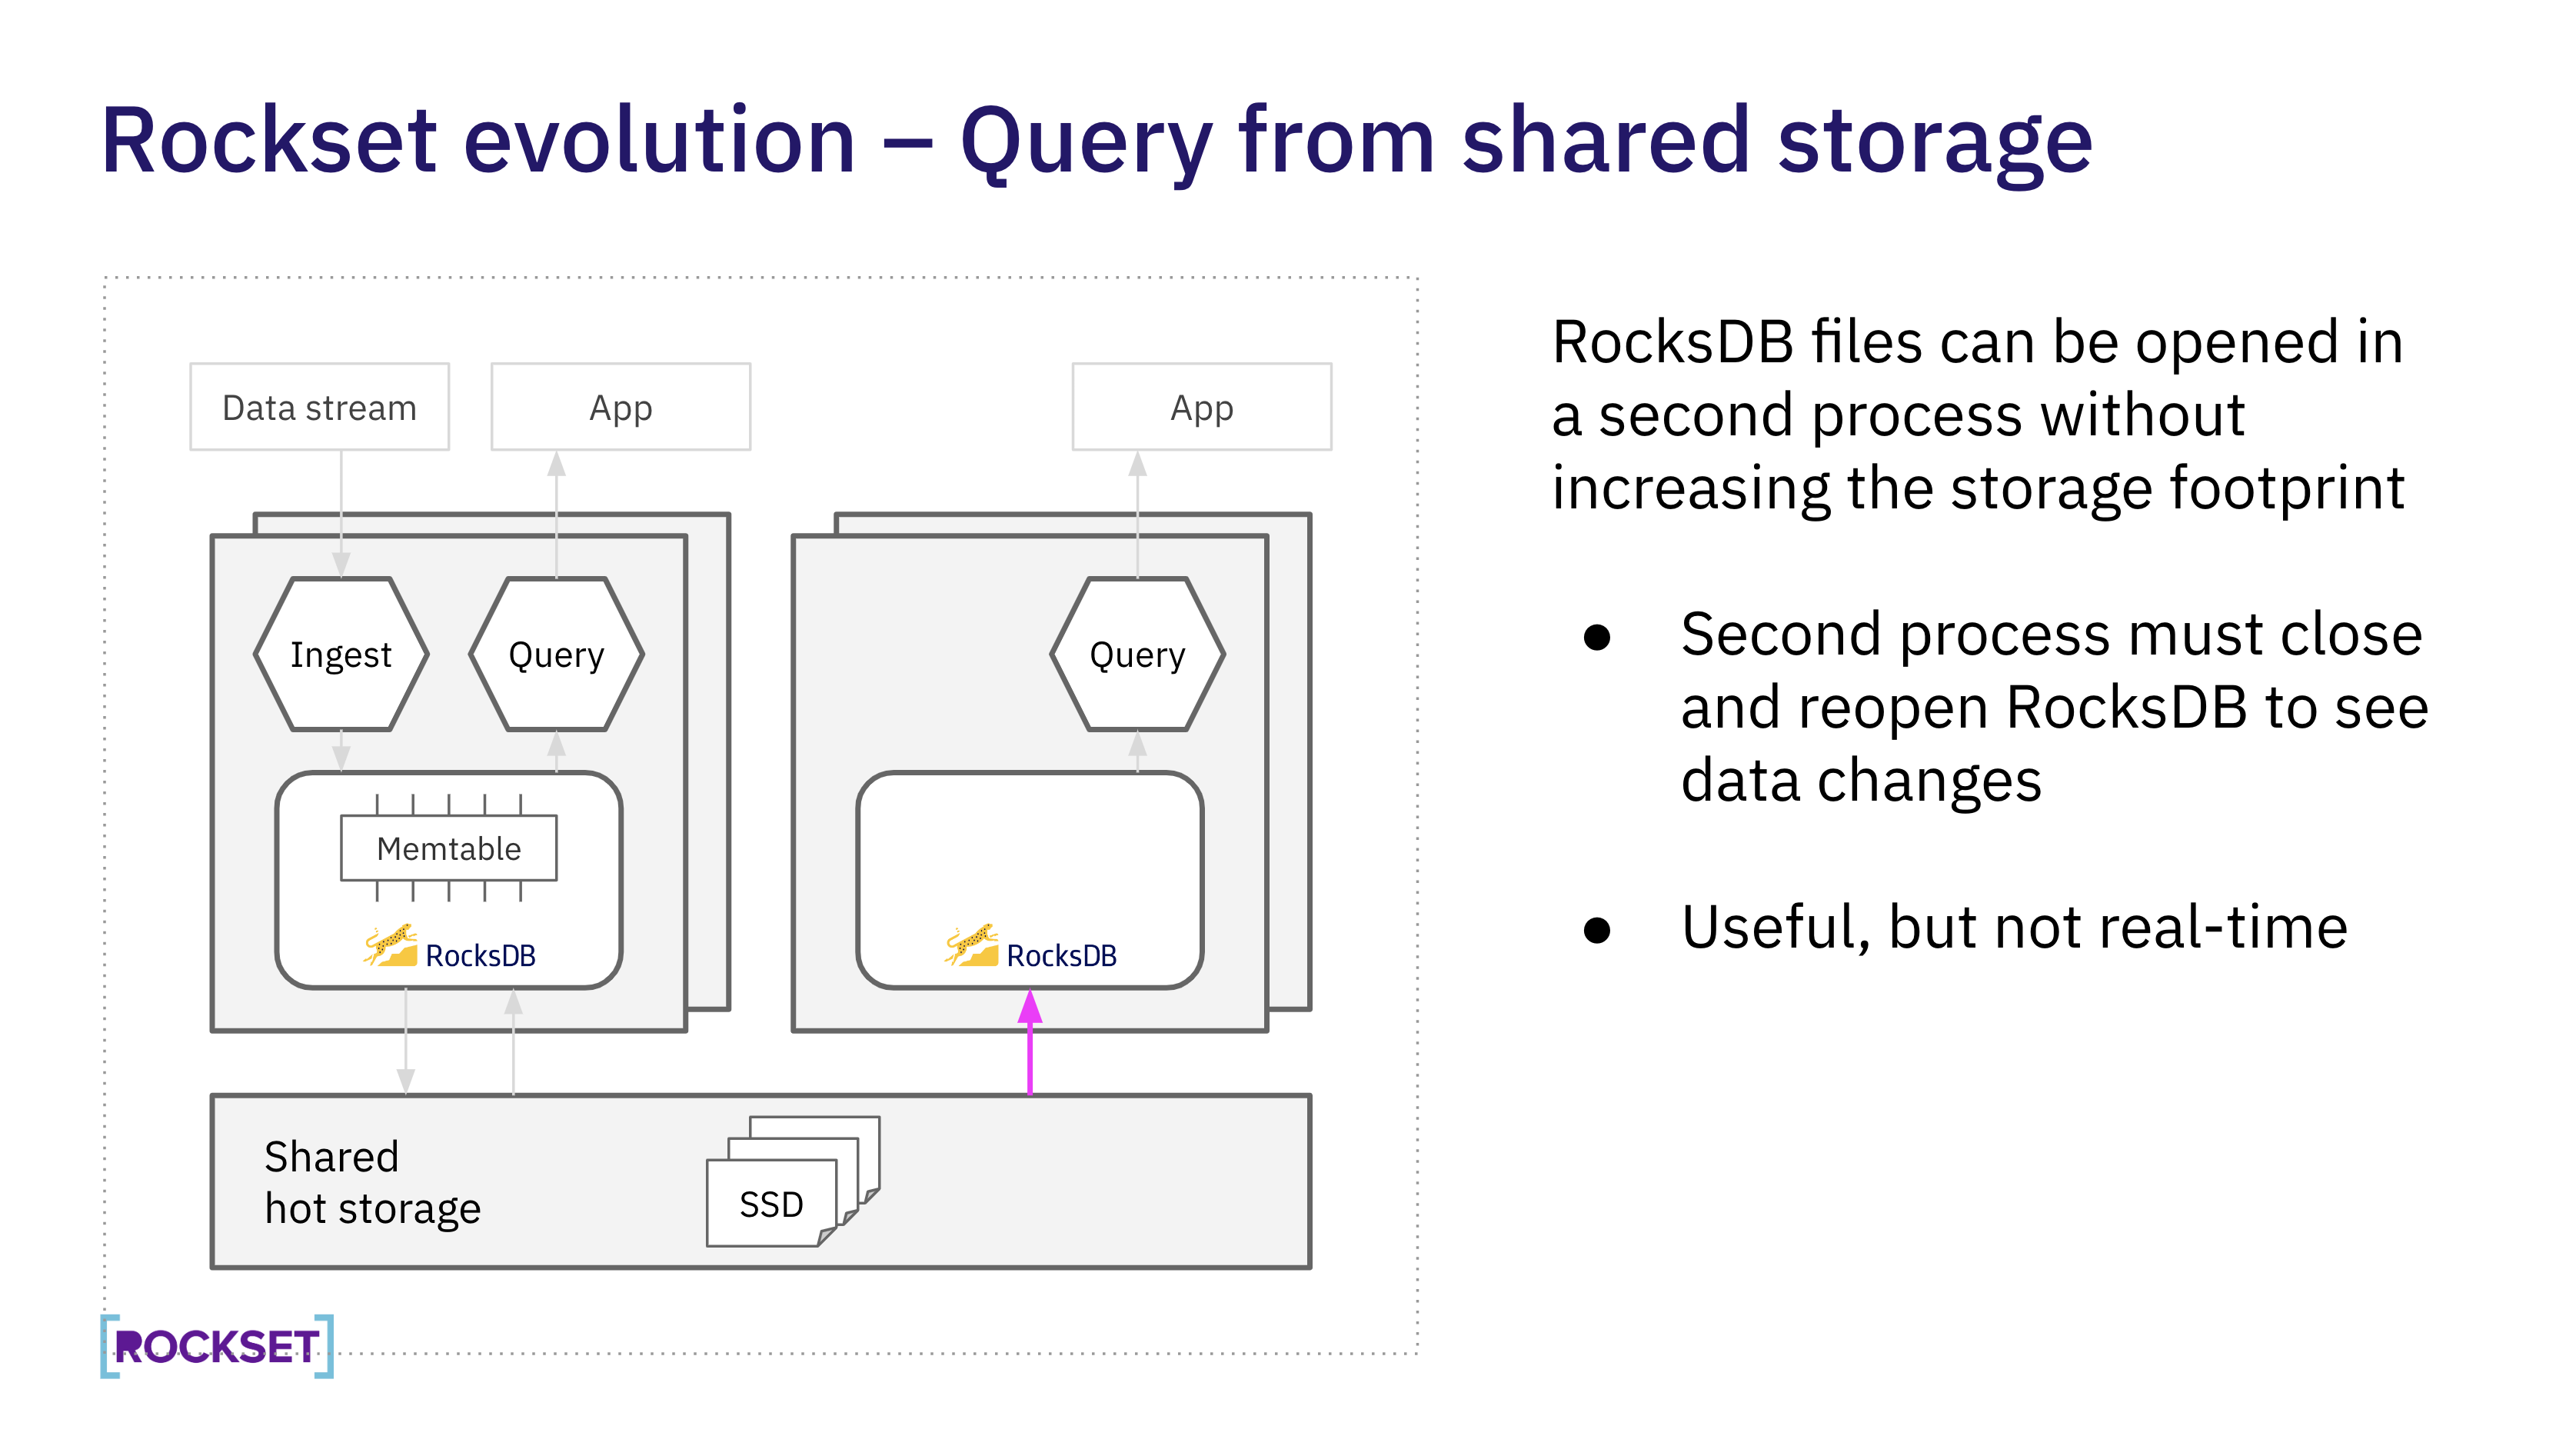 Rockset evolution - Query from shared storage